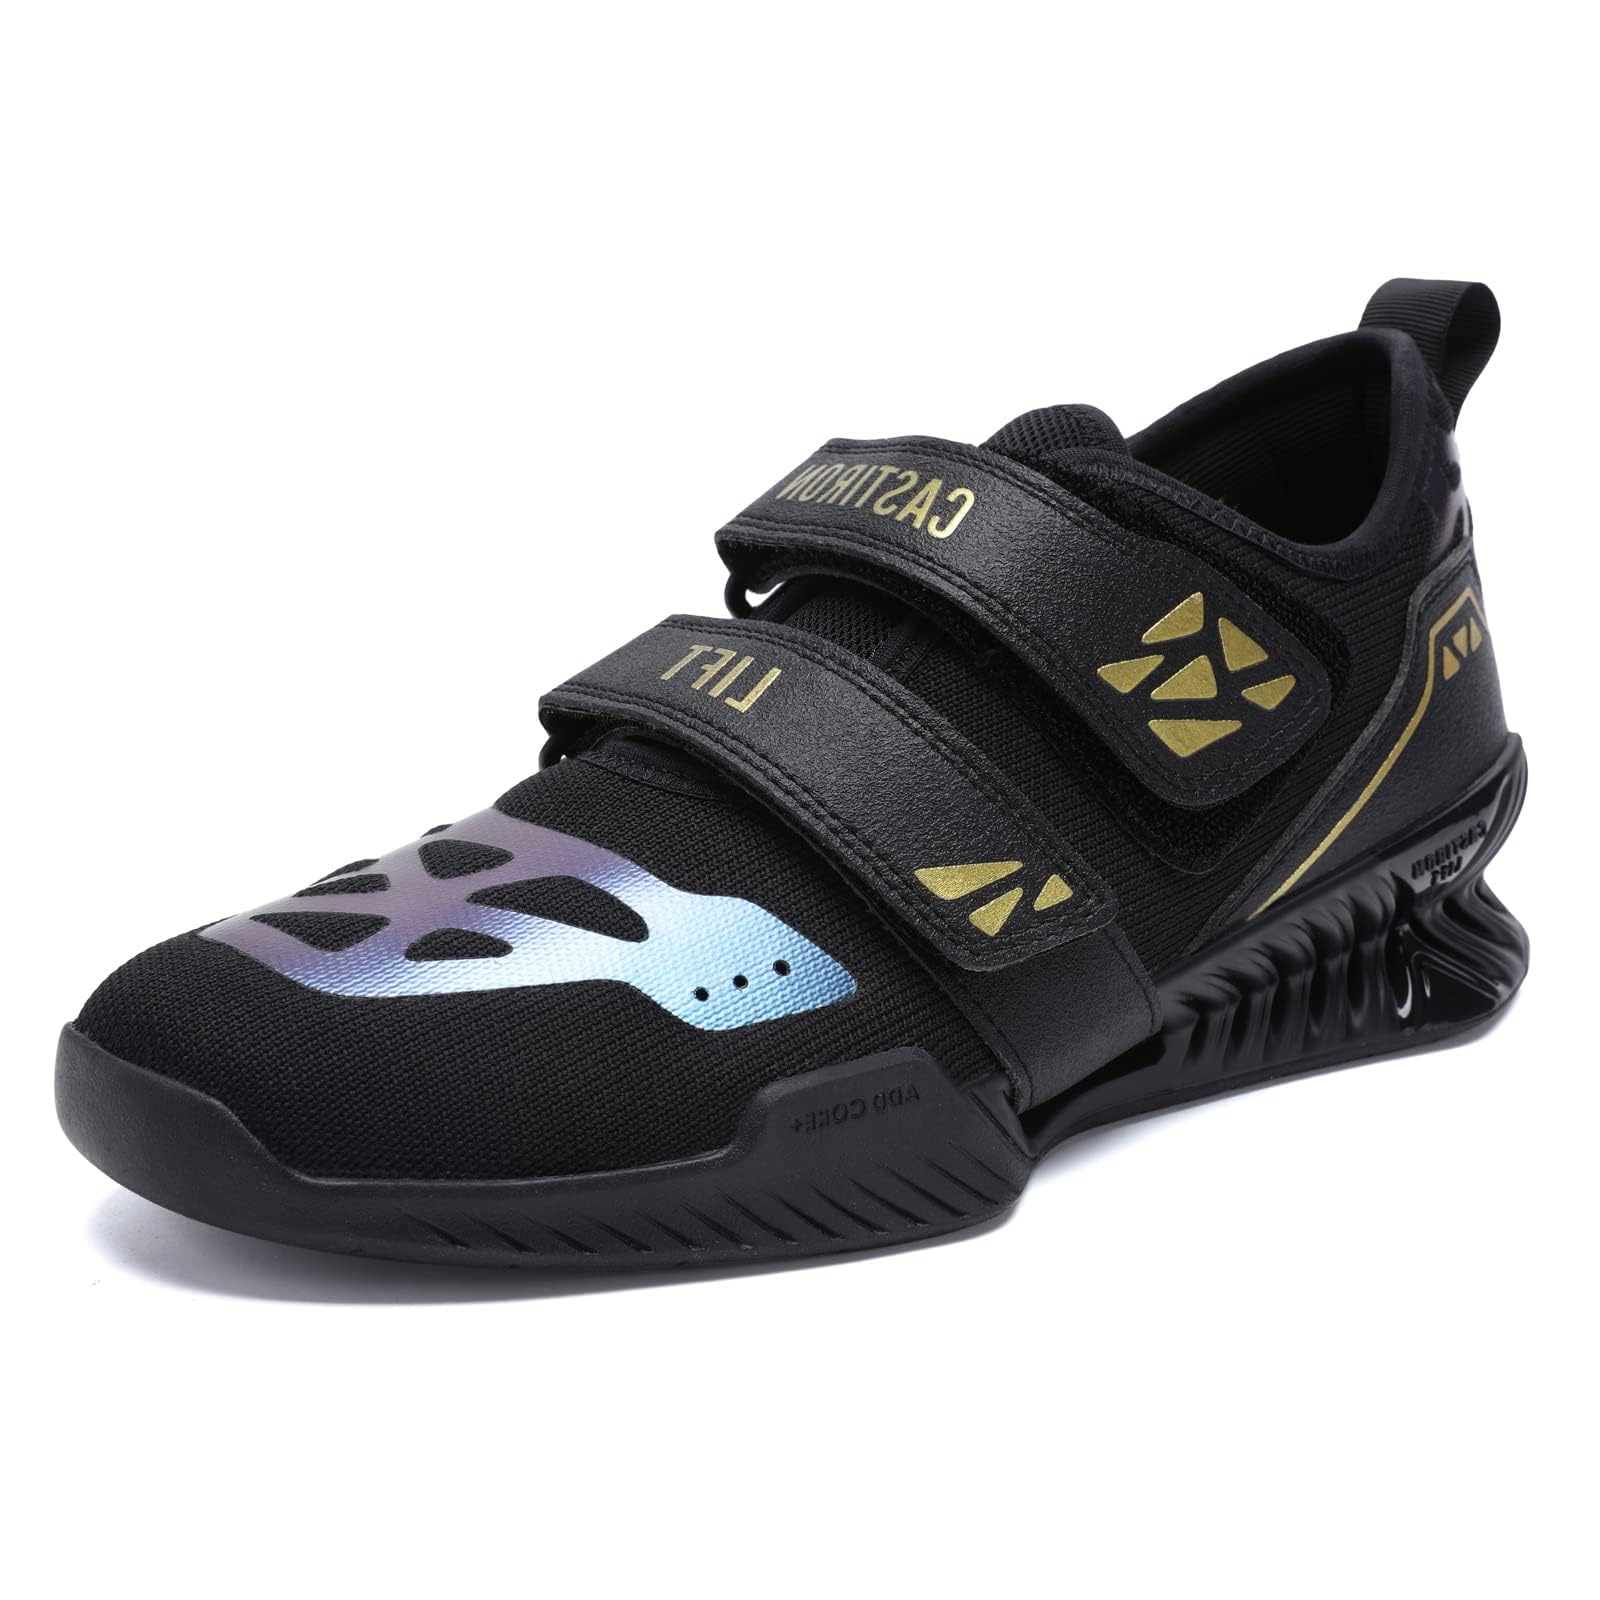 Dodos Shoes | Shoe Shops South Africa | Buy Shoes Online